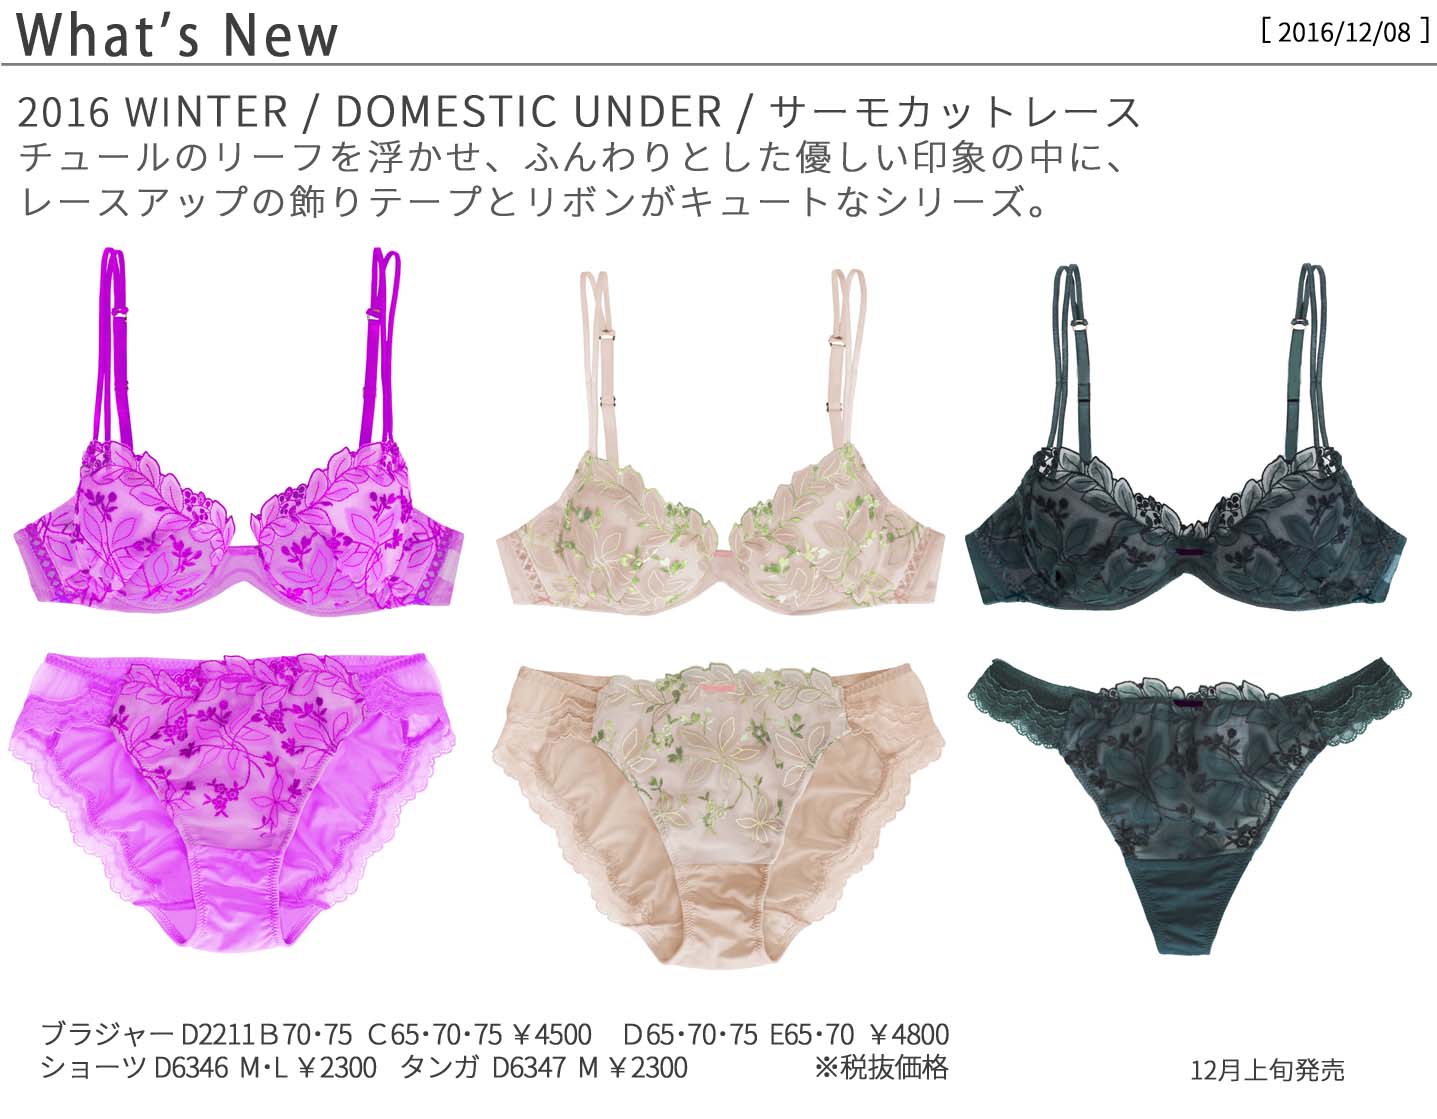 What's New\サーモカットレース